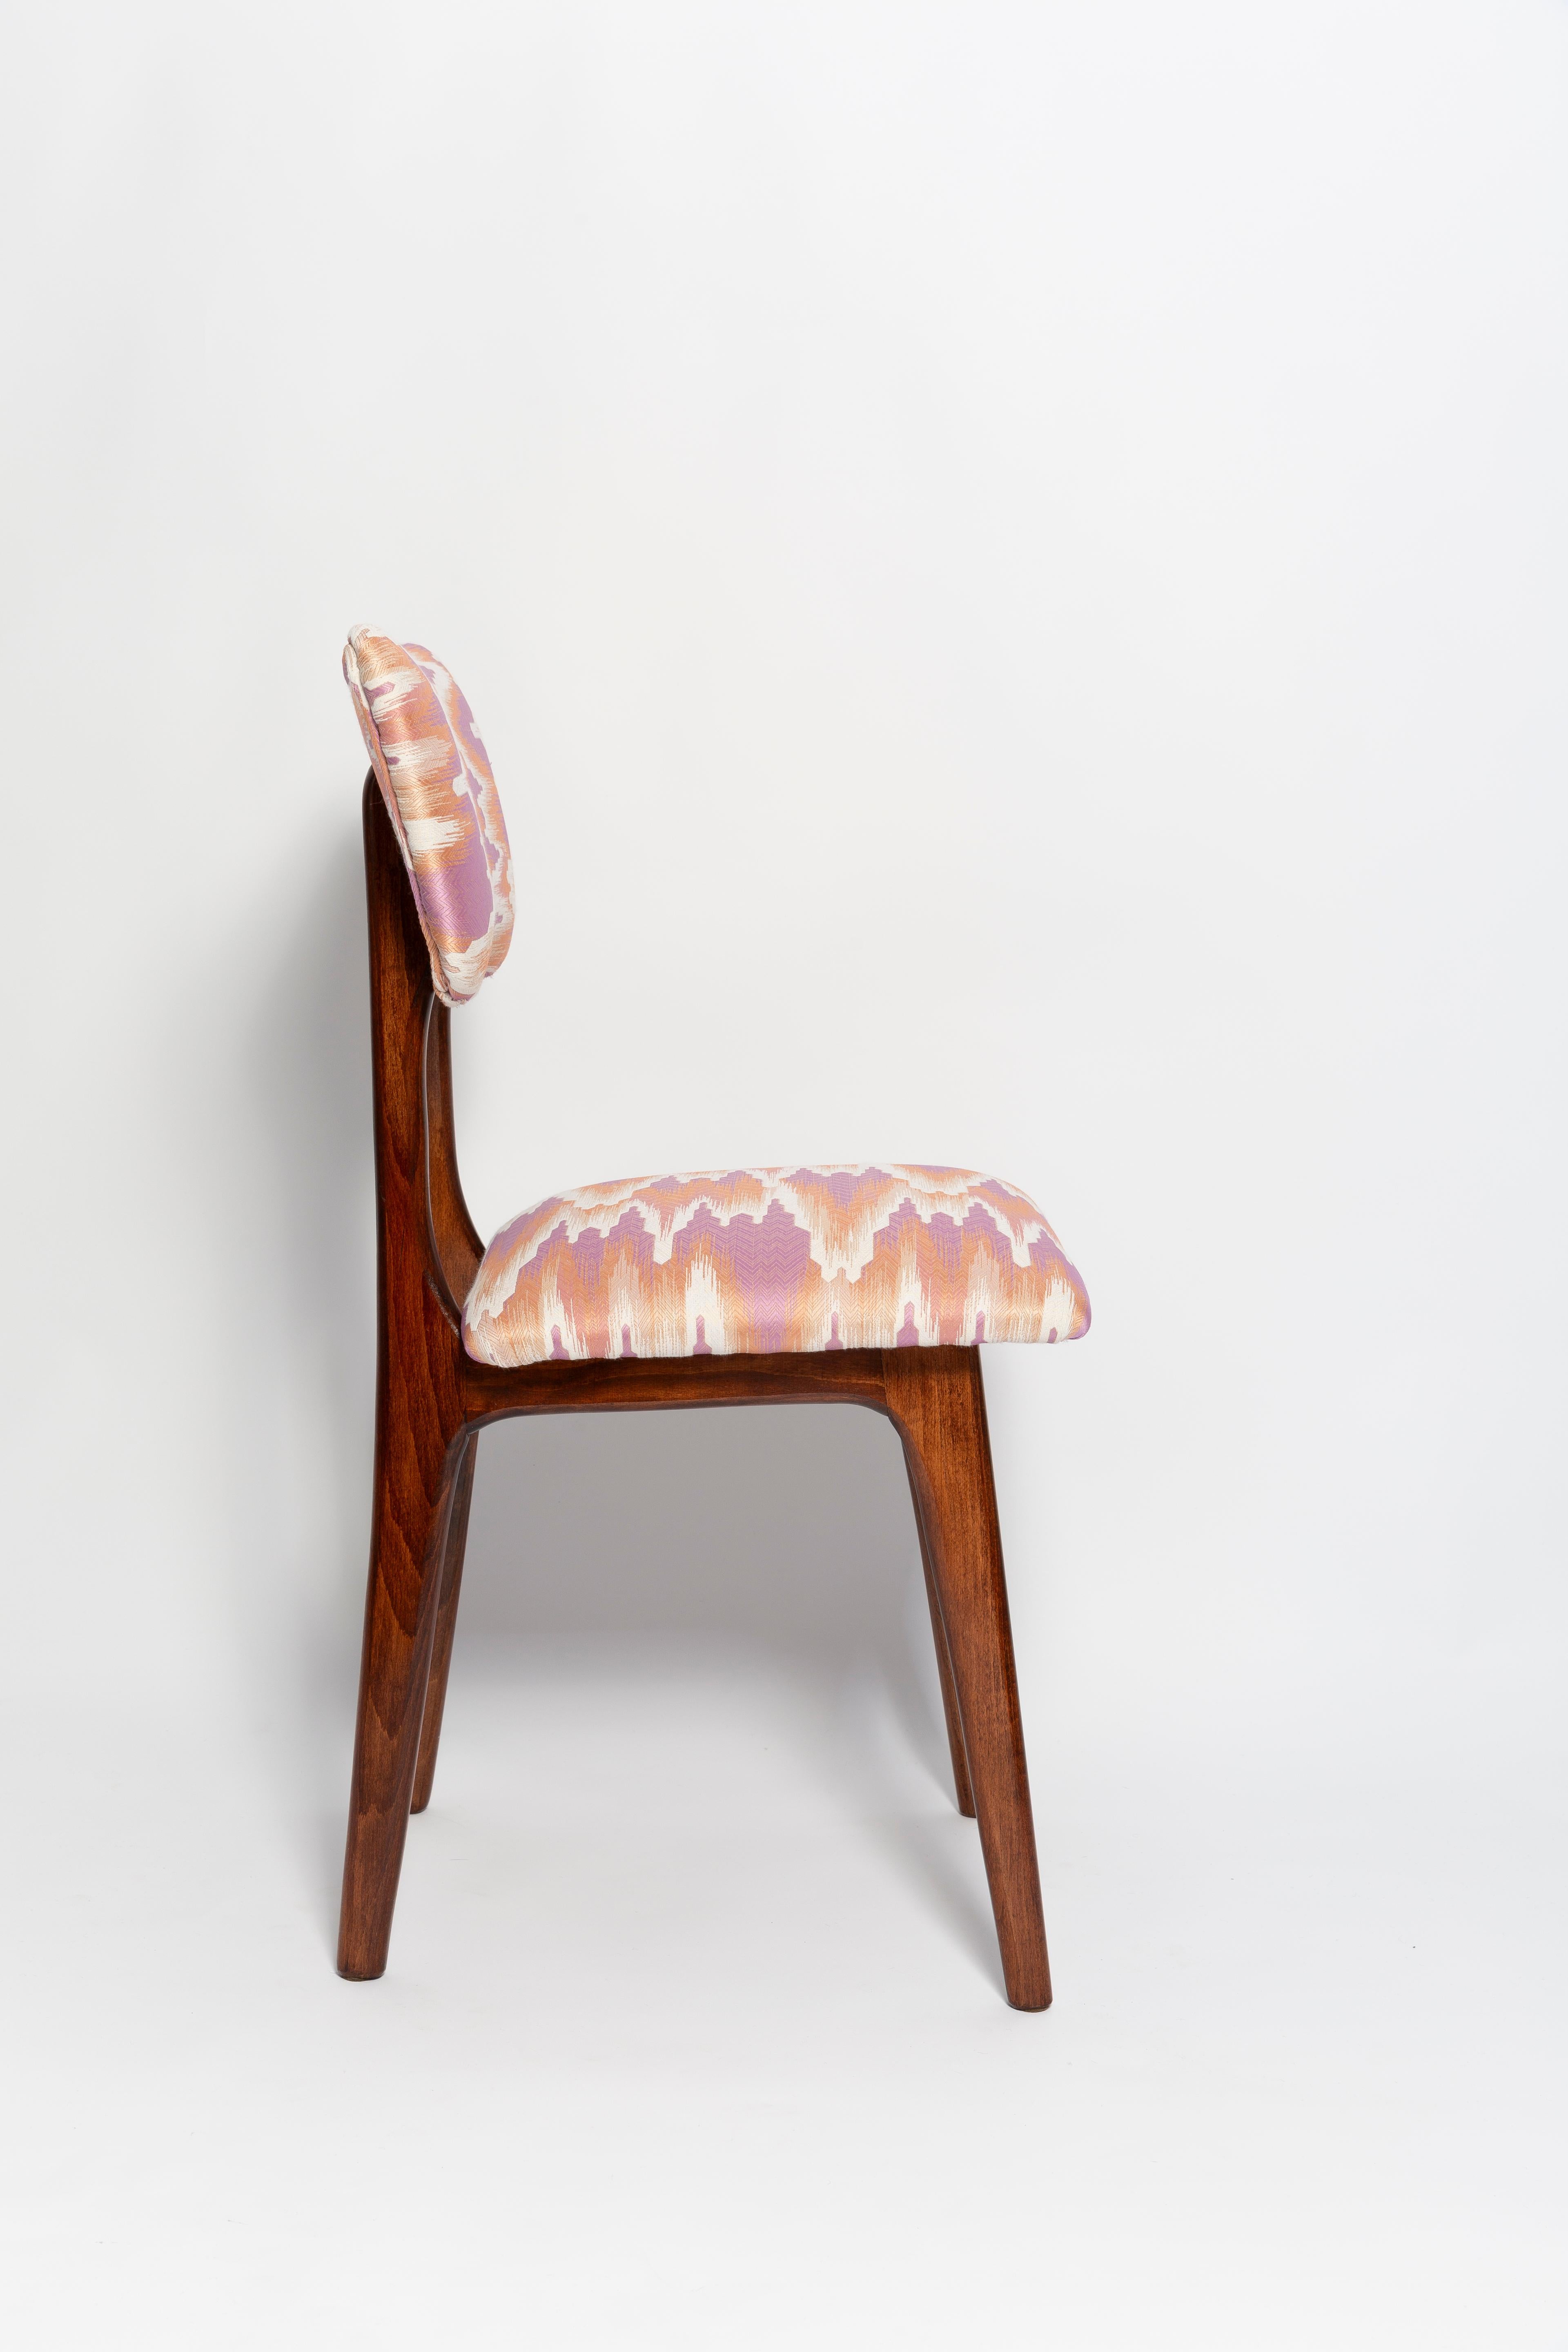 Hand-Crafted Mid Century Butterfly Chair, Pink Fandango Jacquard, Dark Wood, Europe, 1960s For Sale